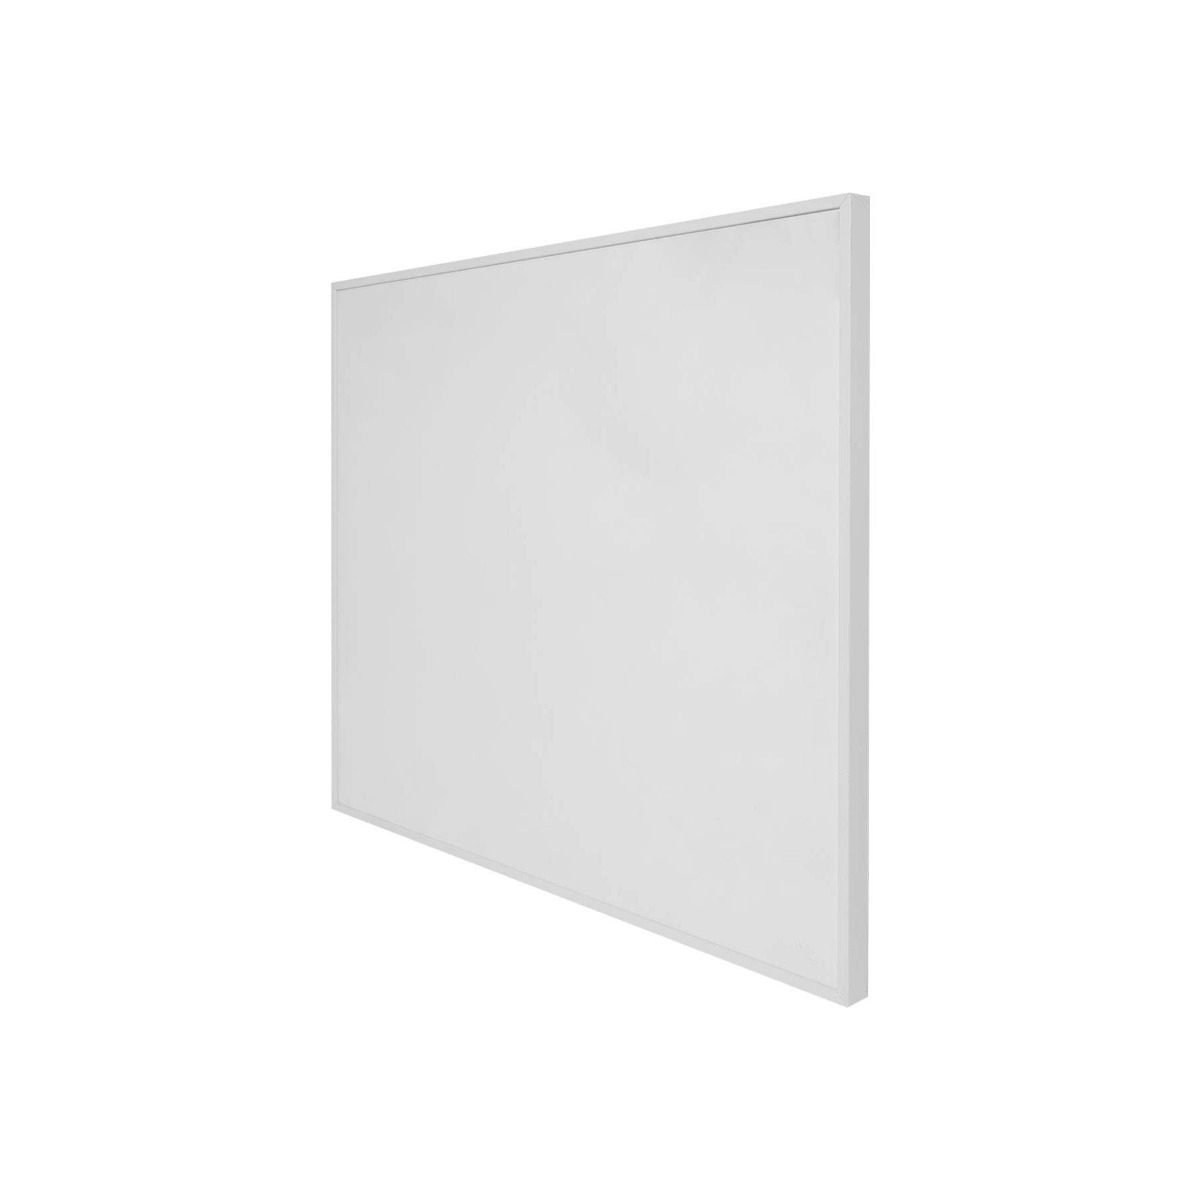 Ecostrad Accent IR Infrared Wall Panel with Remote - 350w (605 x 605mm)